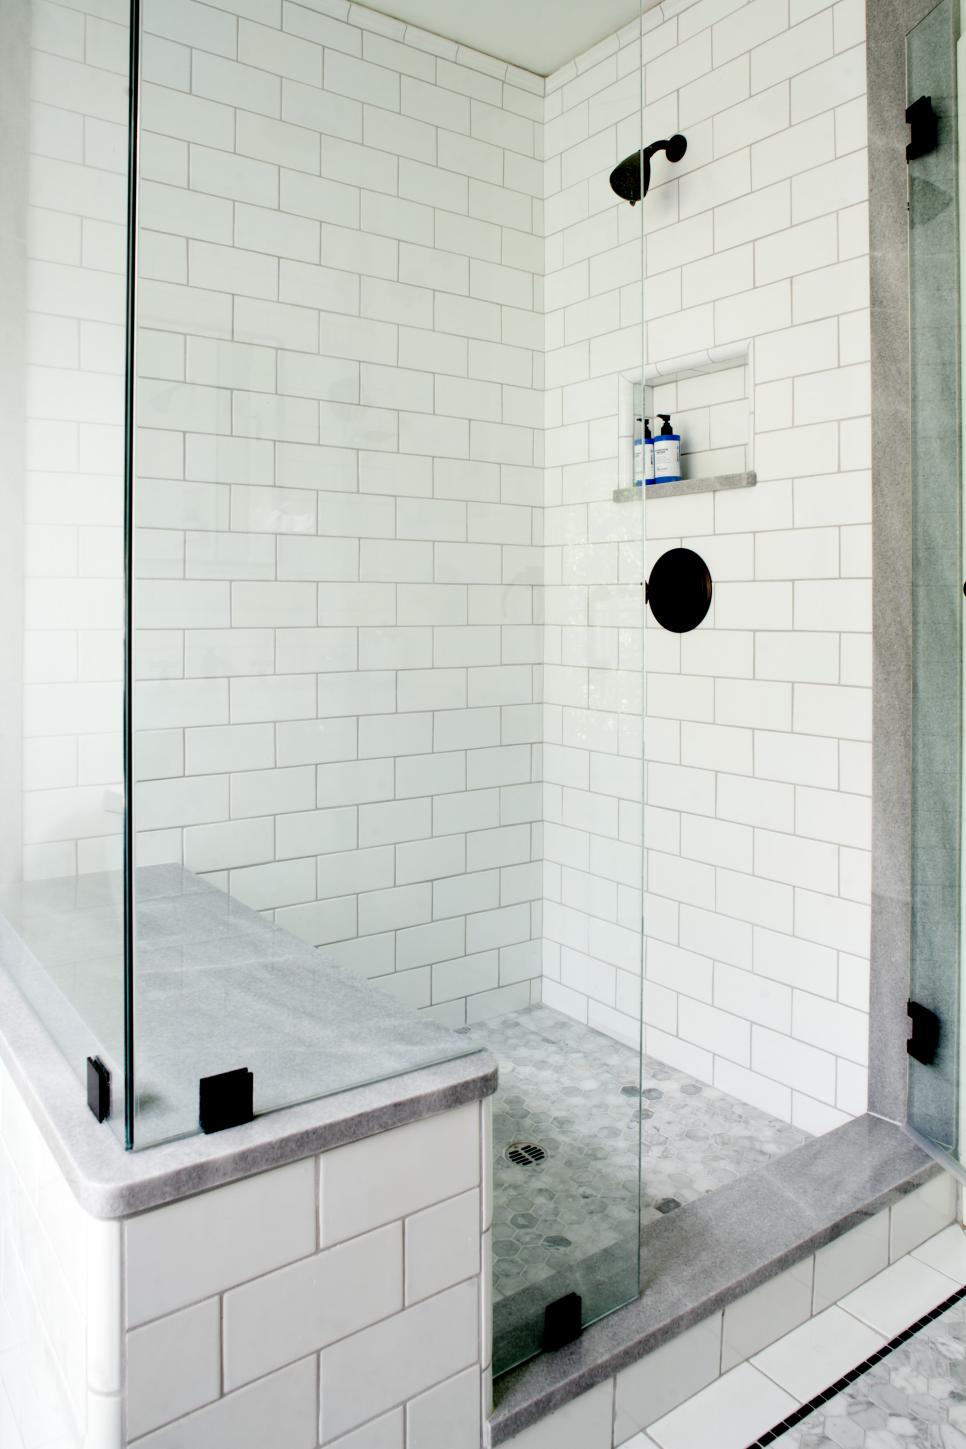 White Tile WalkIn Shower With Glass Walls and Sitting Bench HGTV